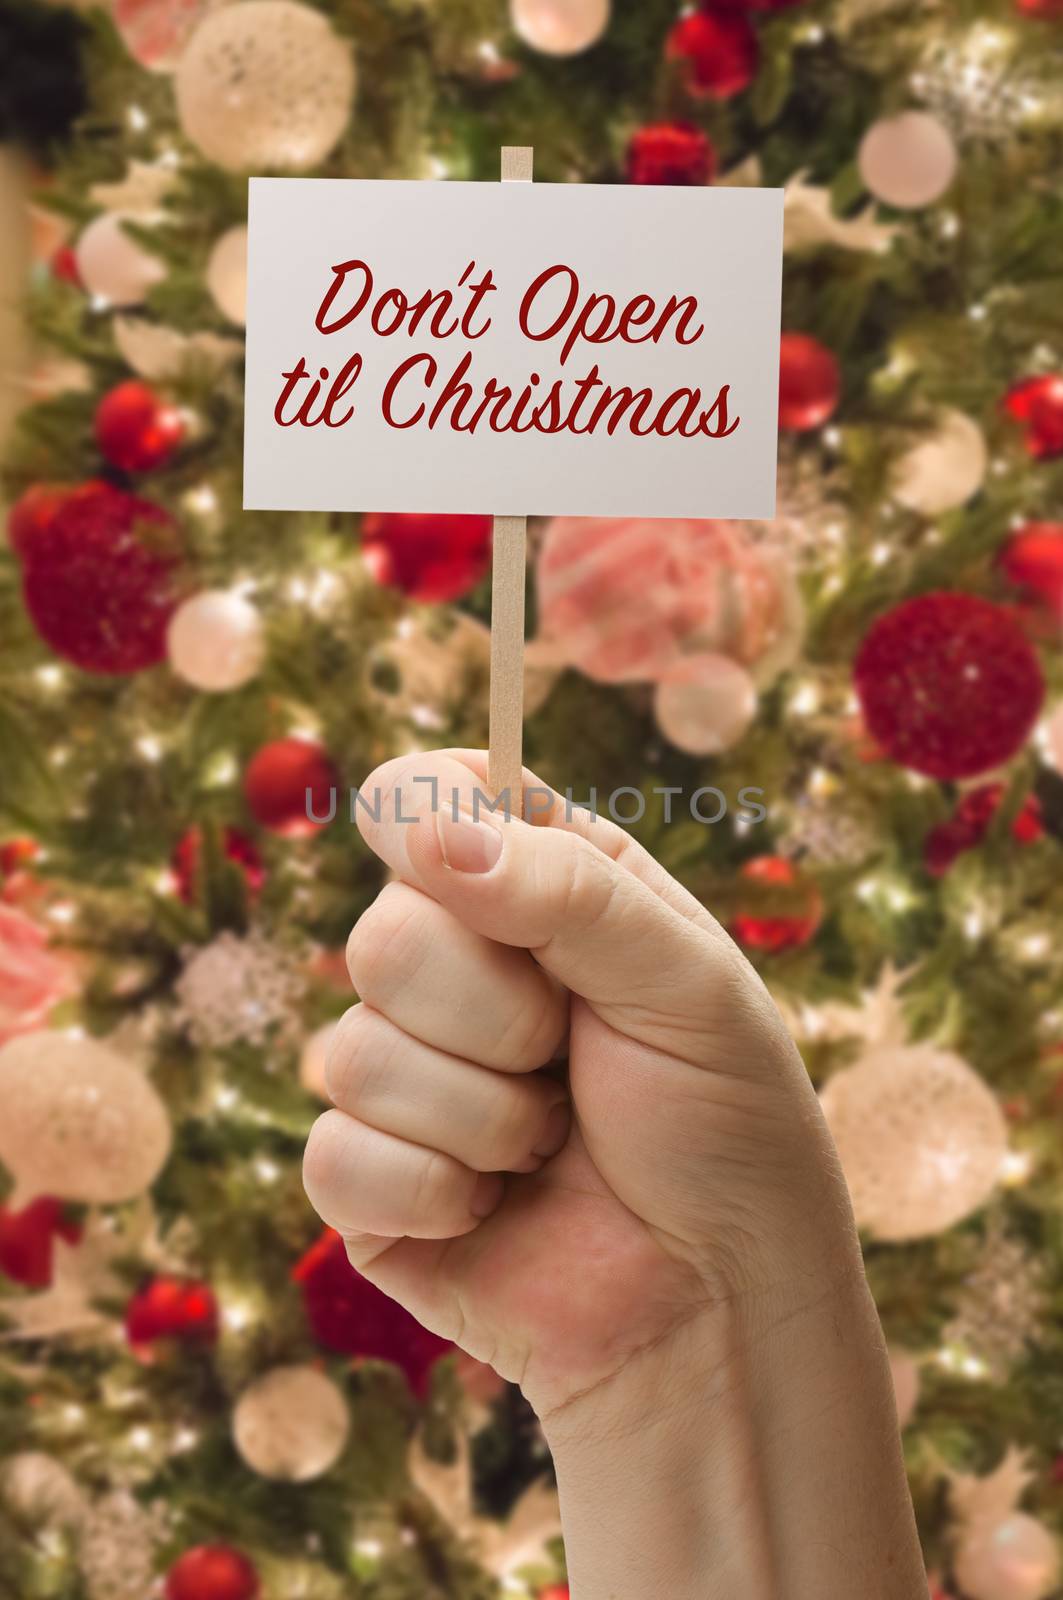 Hand Holding Don't Open Til Christmas Card In Front of Decorated Christmas Tree. by Feverpitched